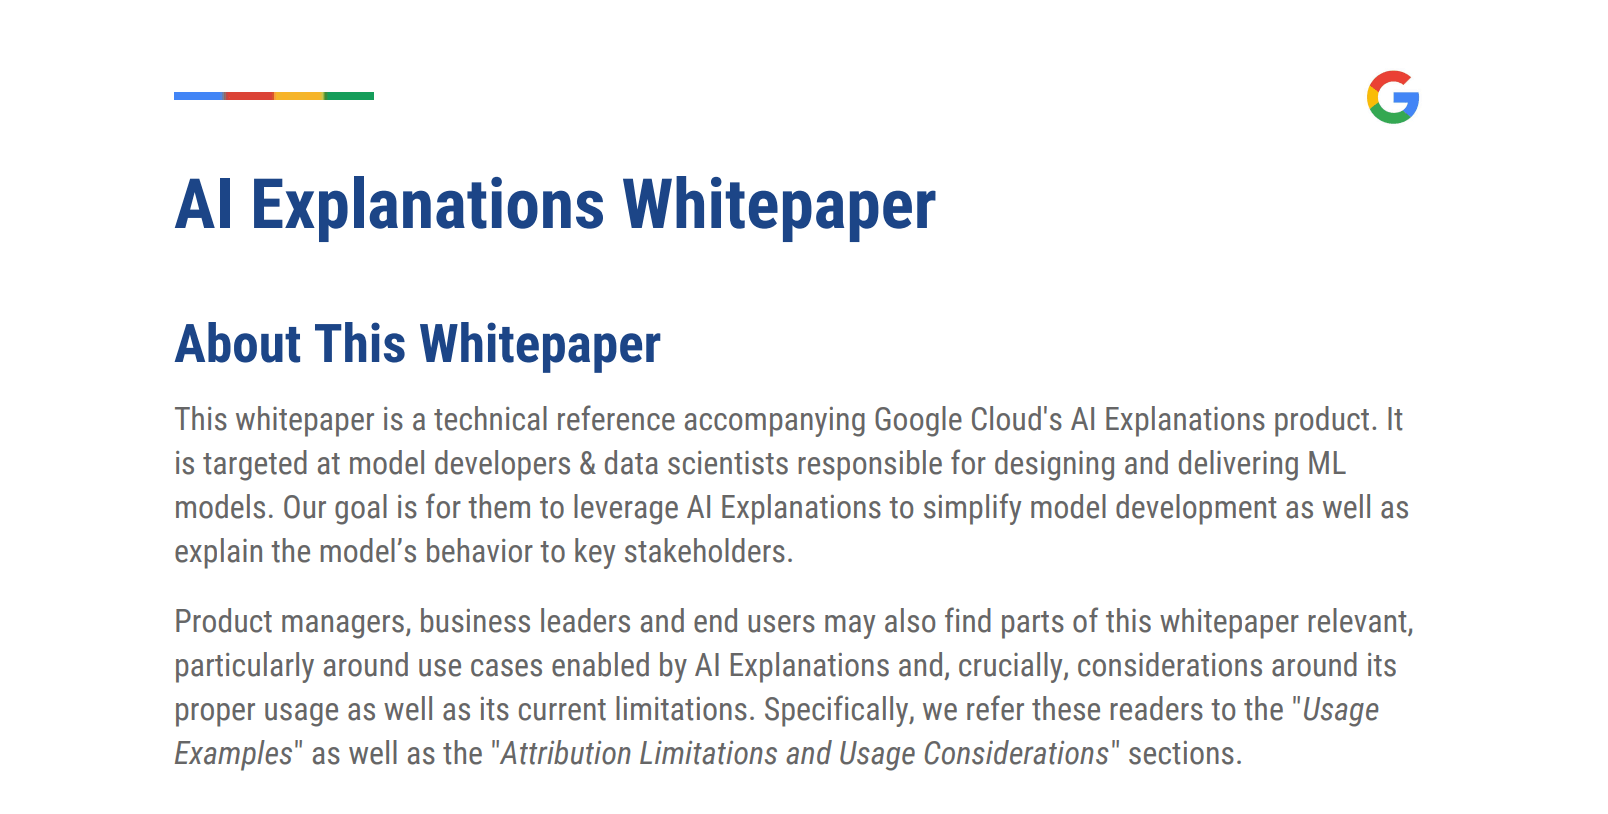 Example of a whitepaper from Google